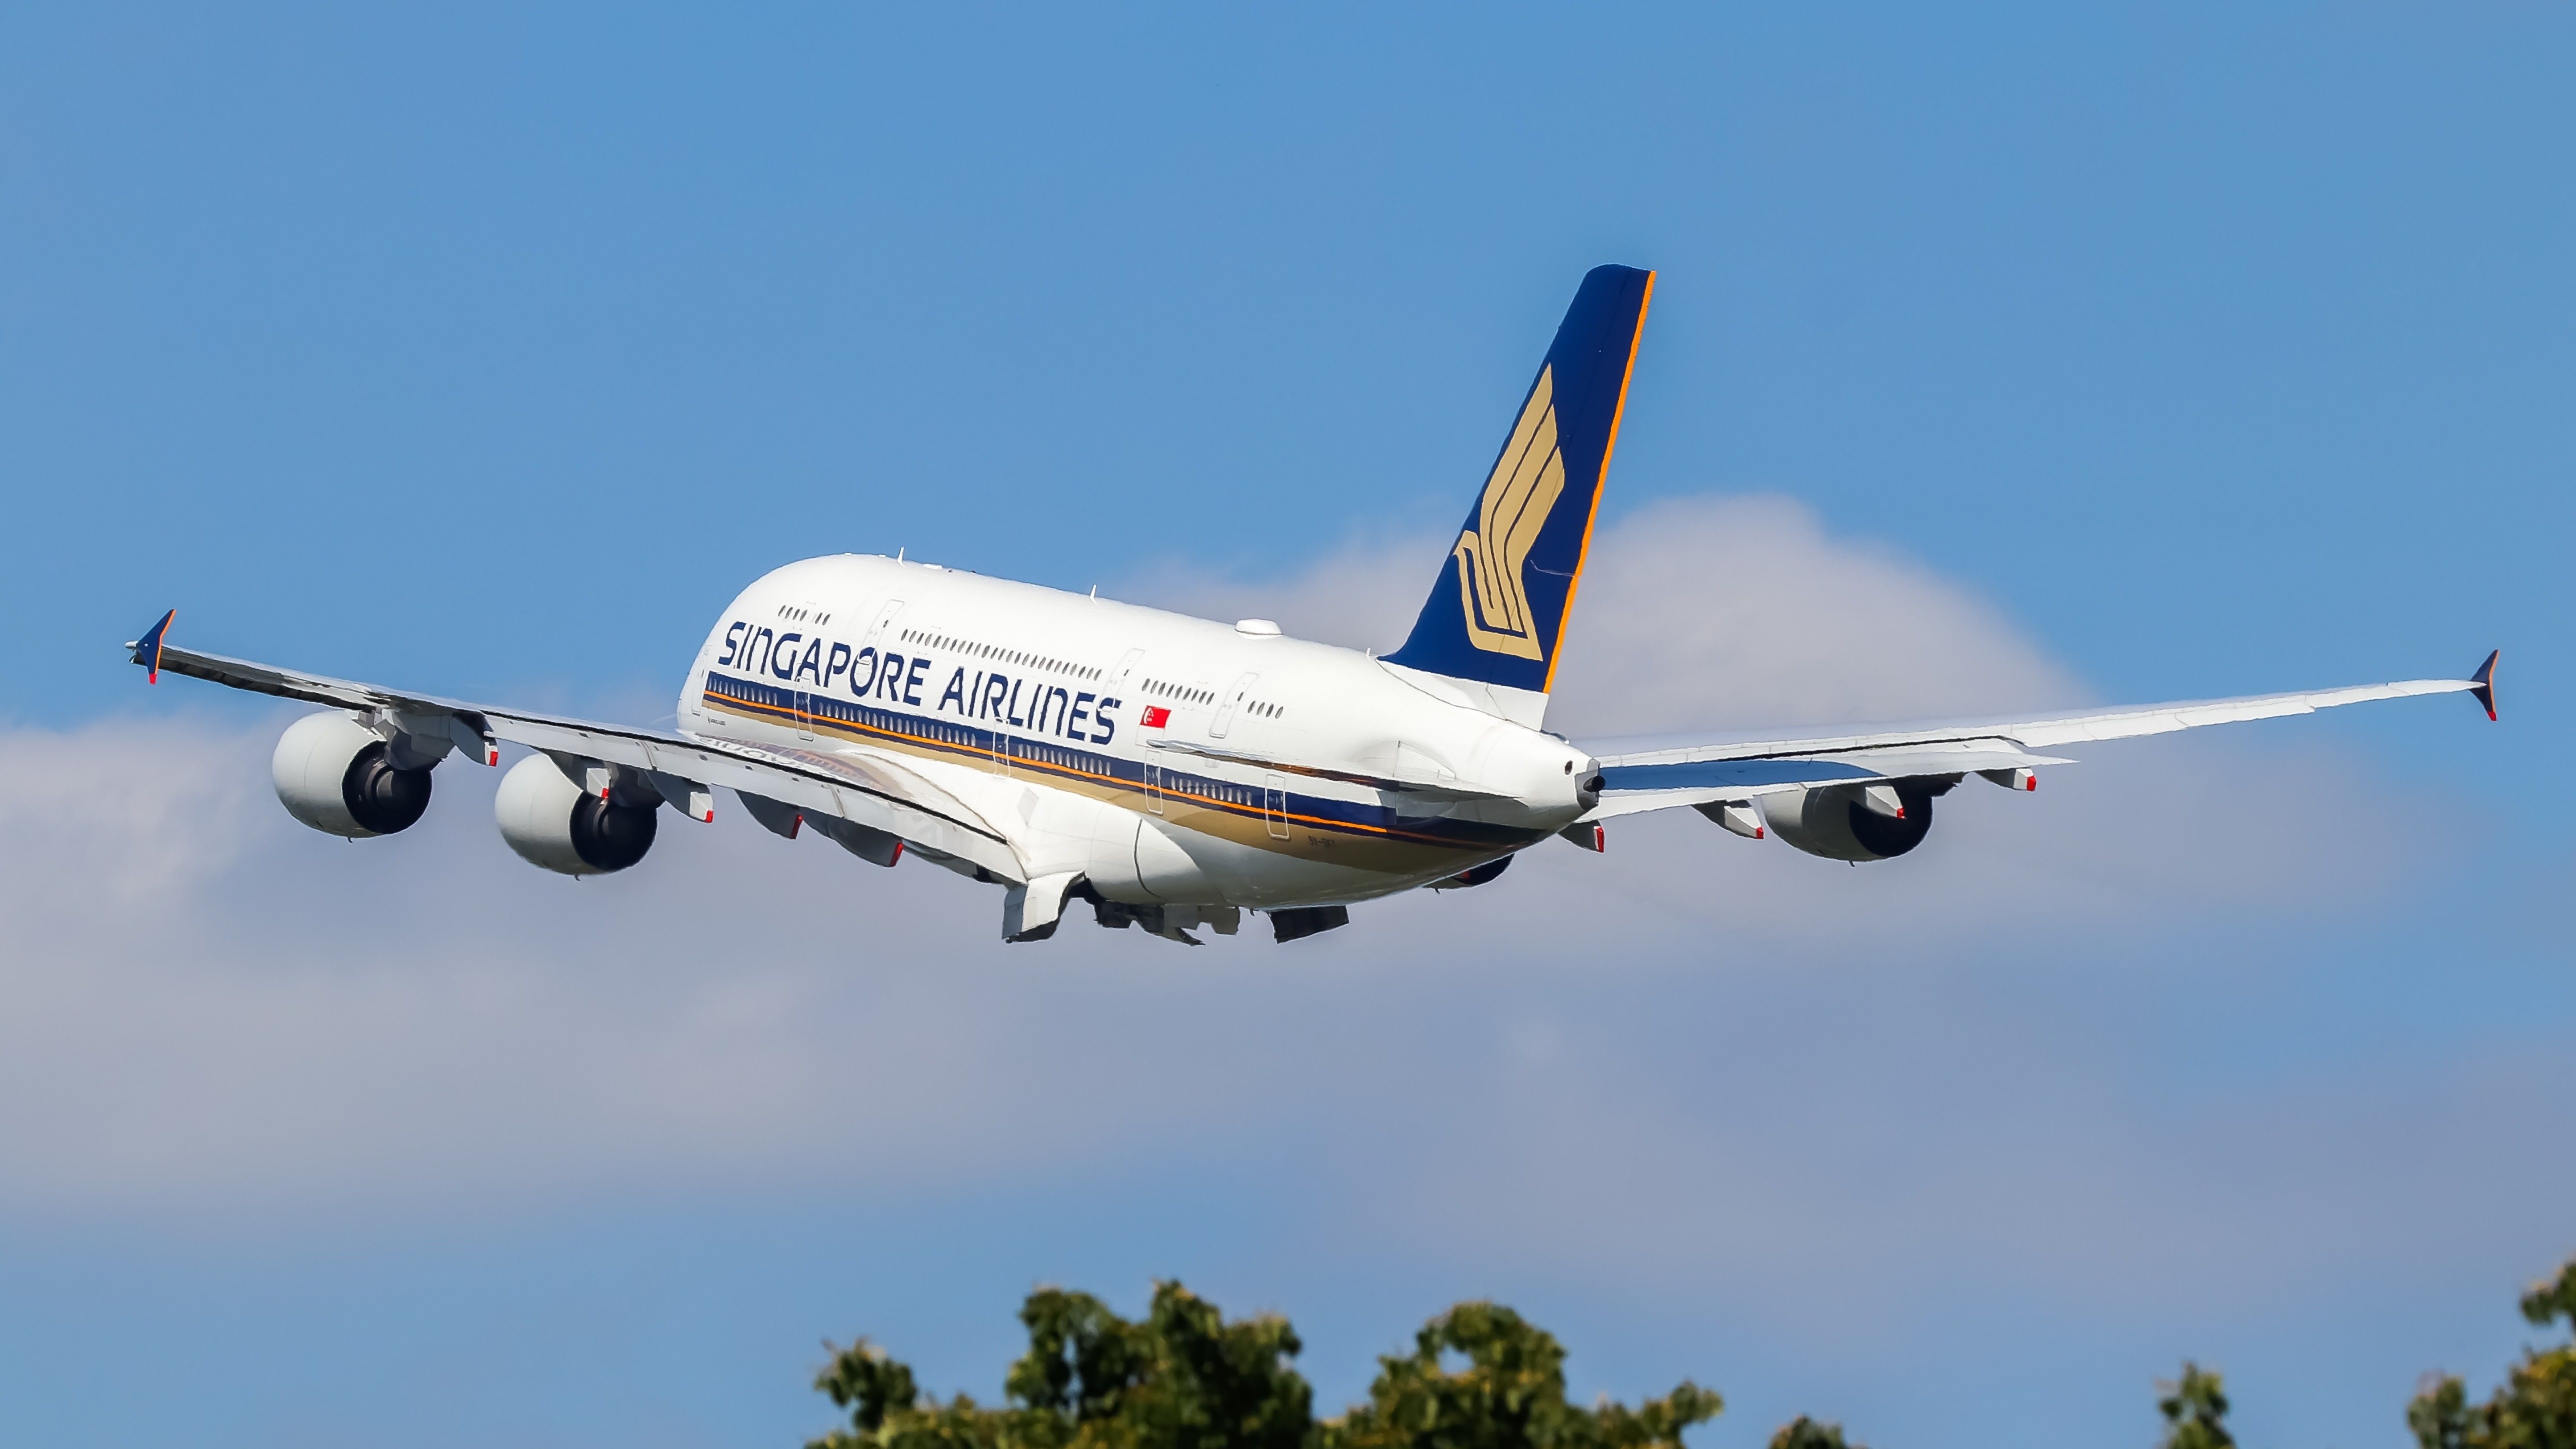 A Singapore Airlines Airbus A380 taking off into the sky.